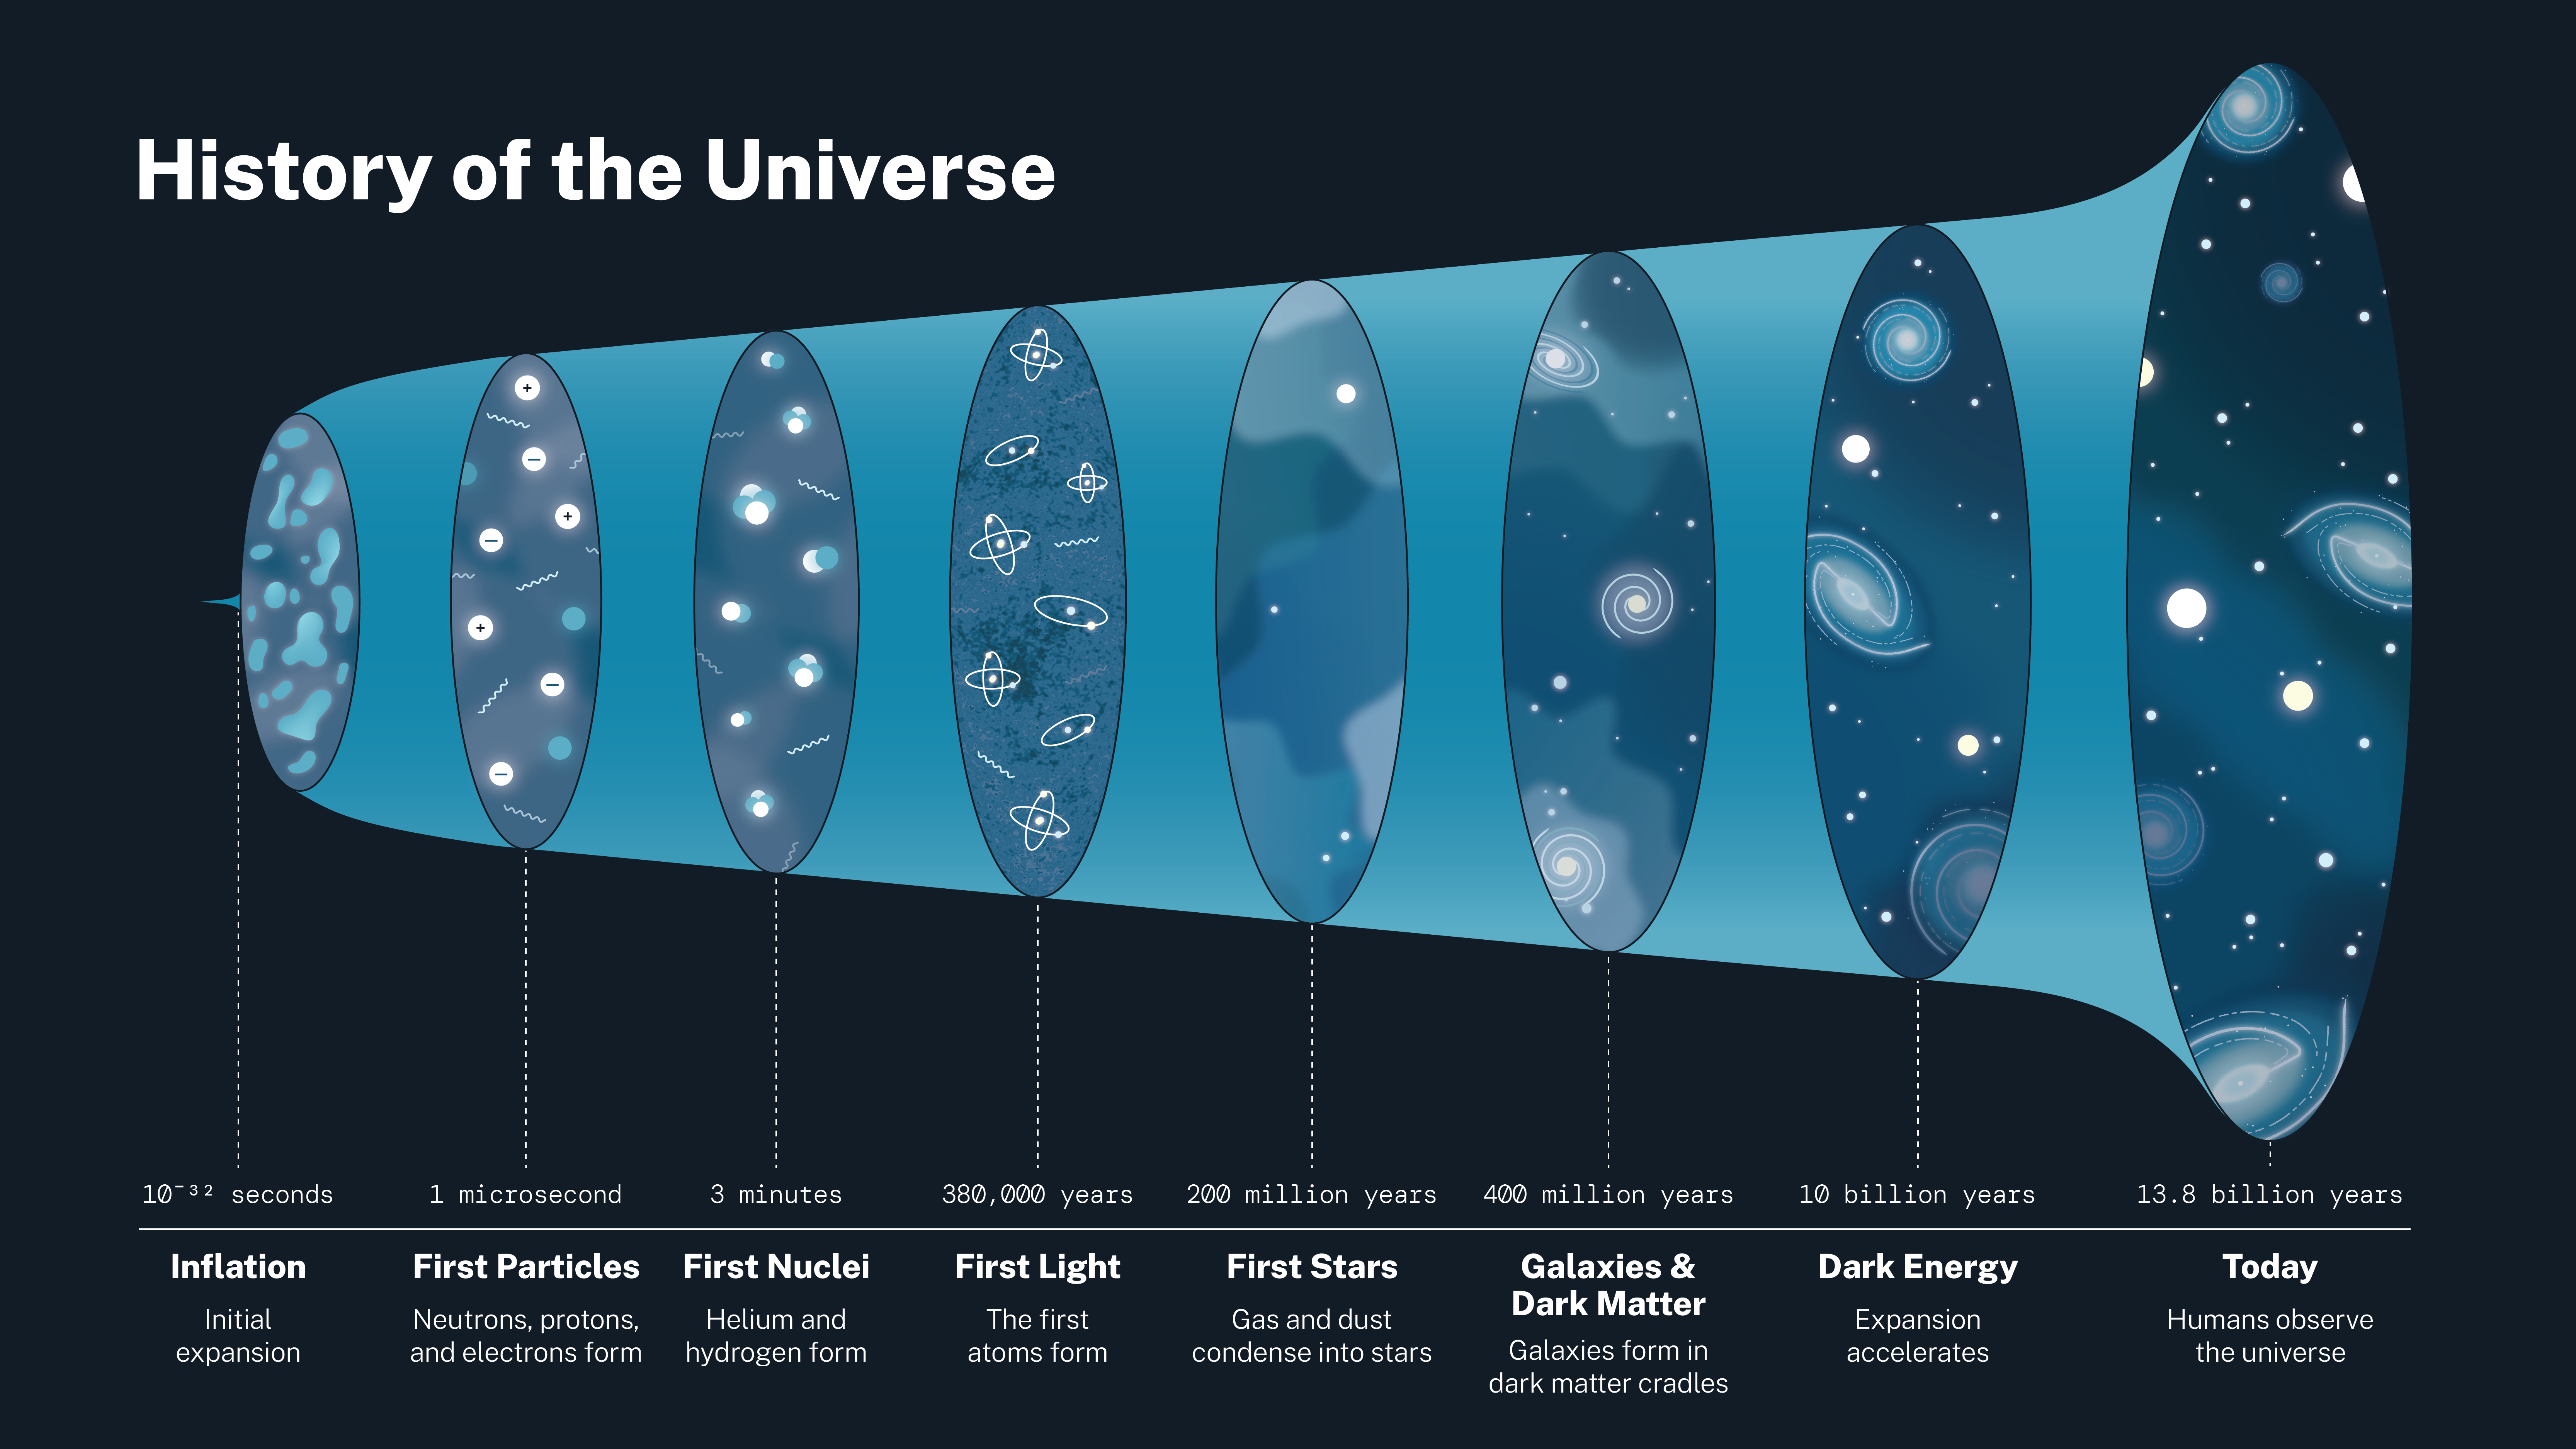 Big Bang Infographic showing the timeline of the history of the big bang and the formation of the building blocks of the universe